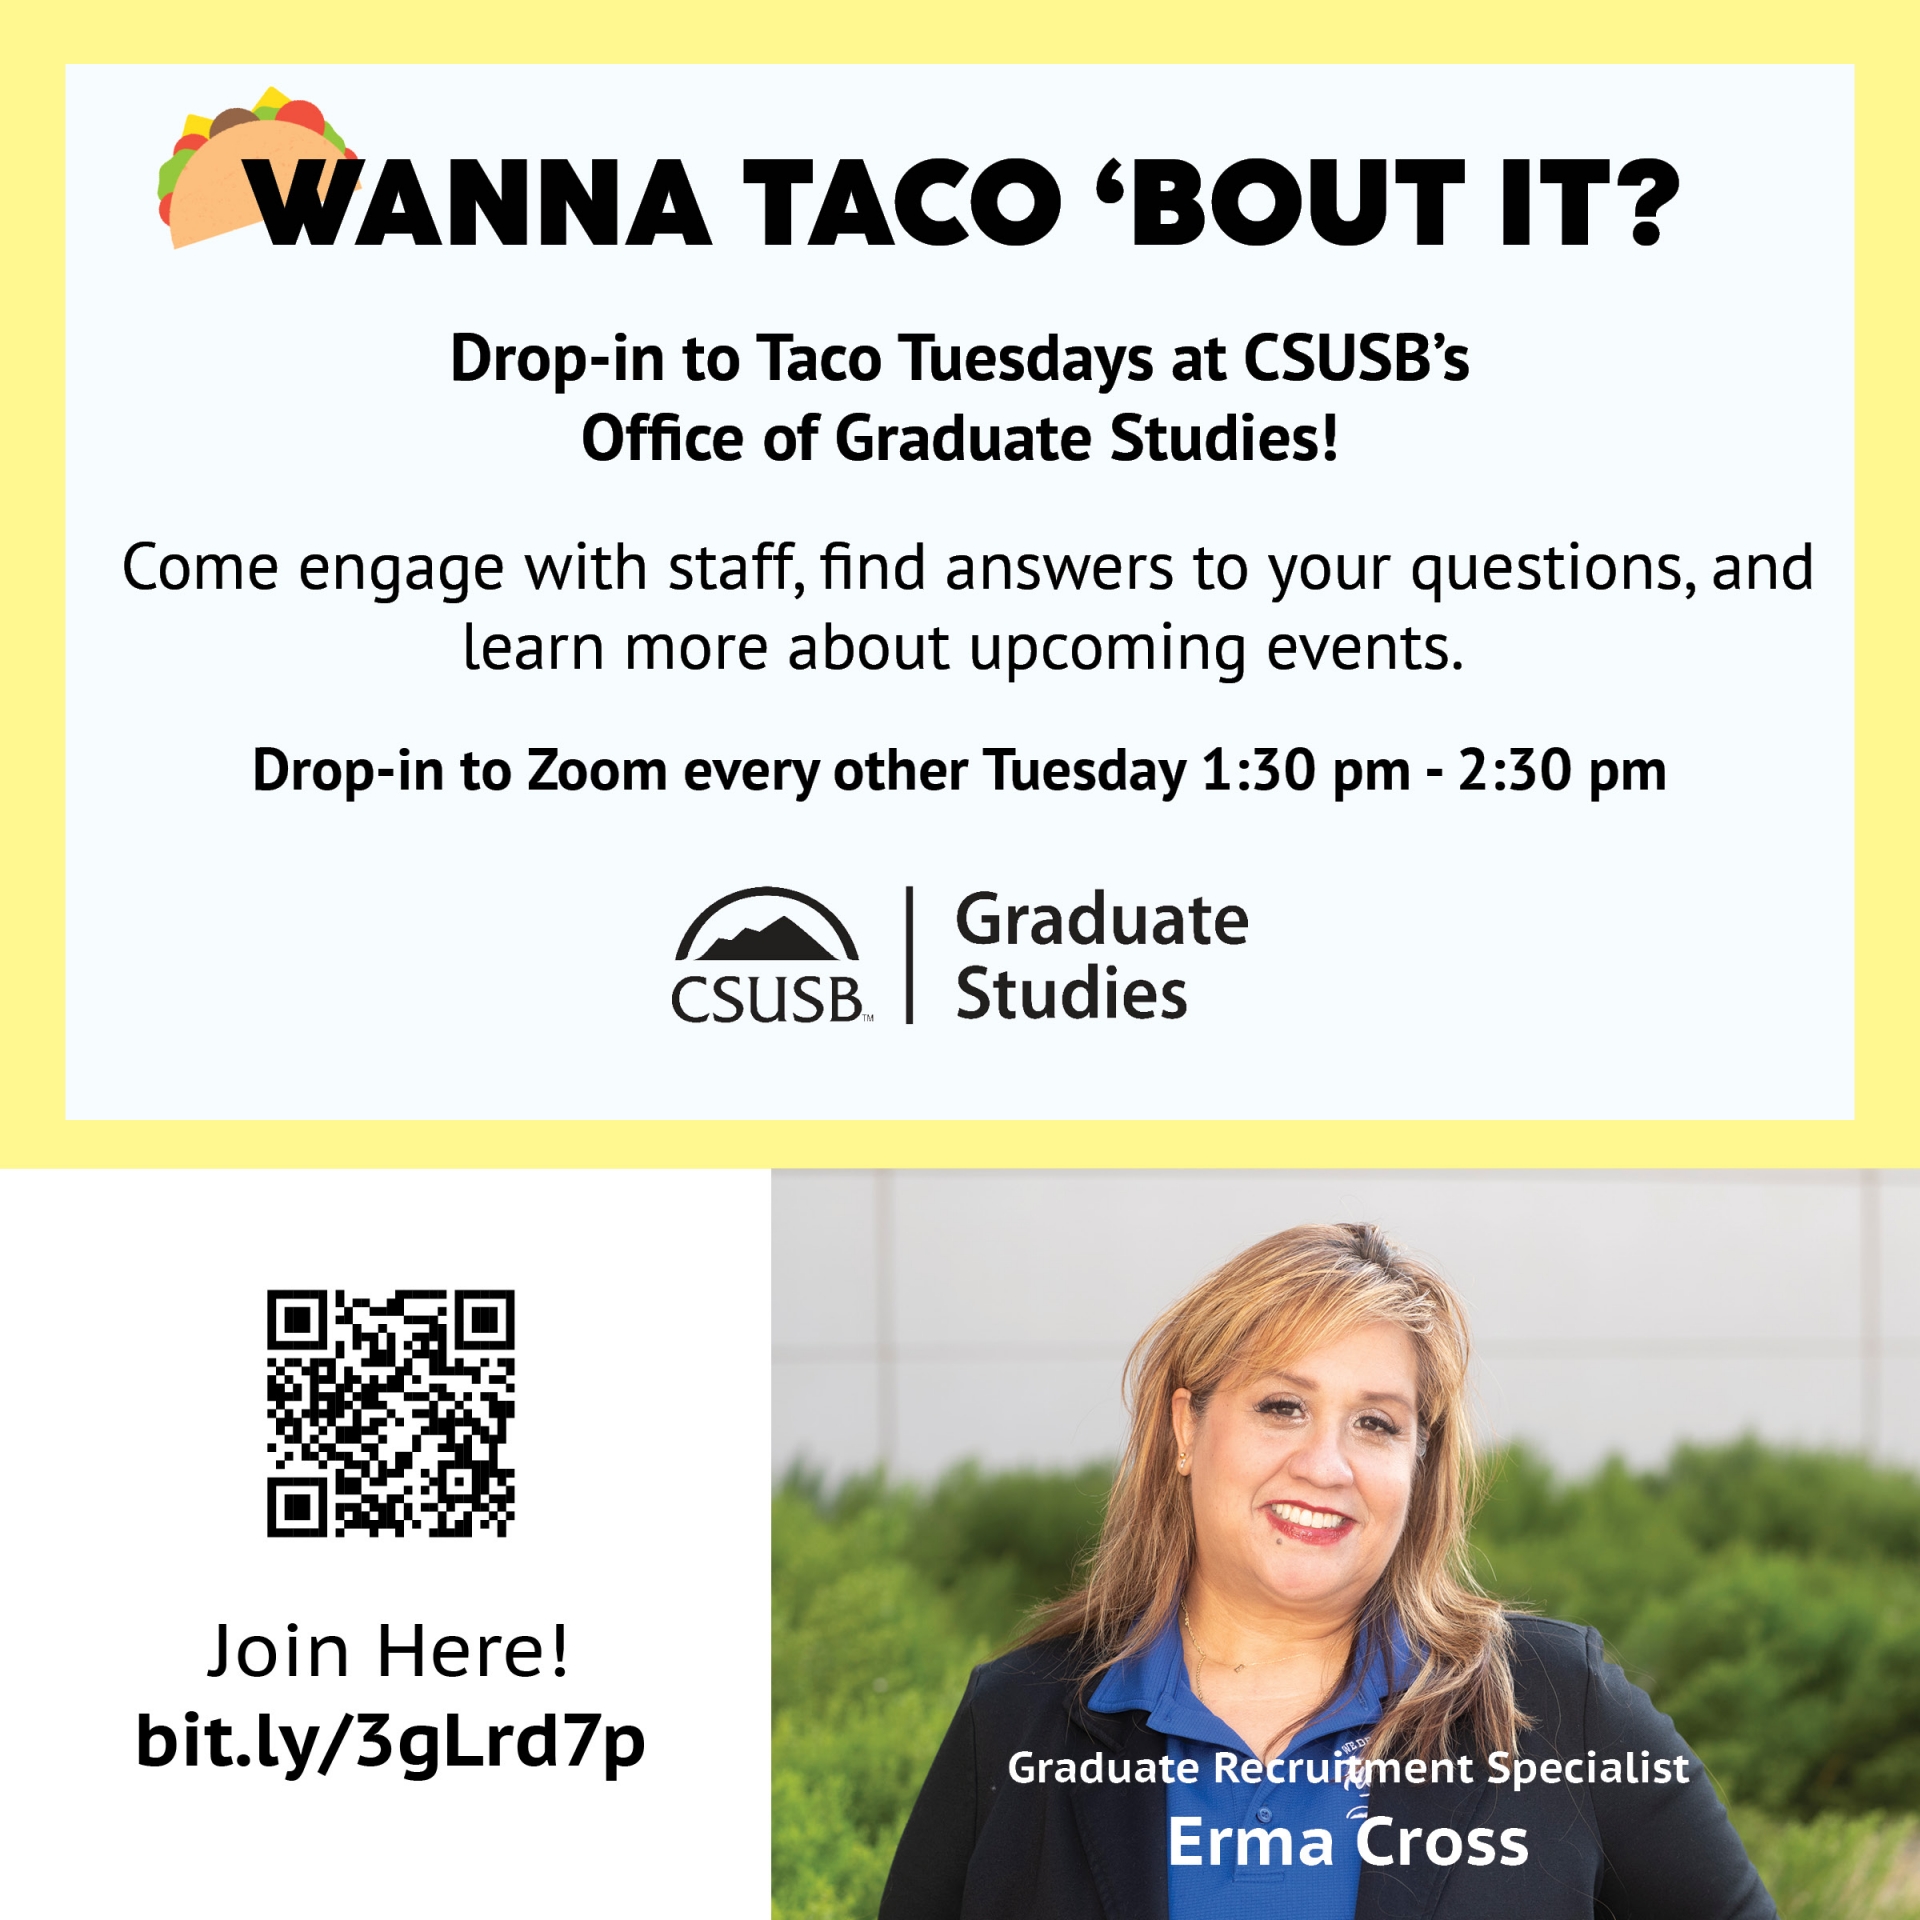 Taco Tuesday drop-in session. Scan QR code to join